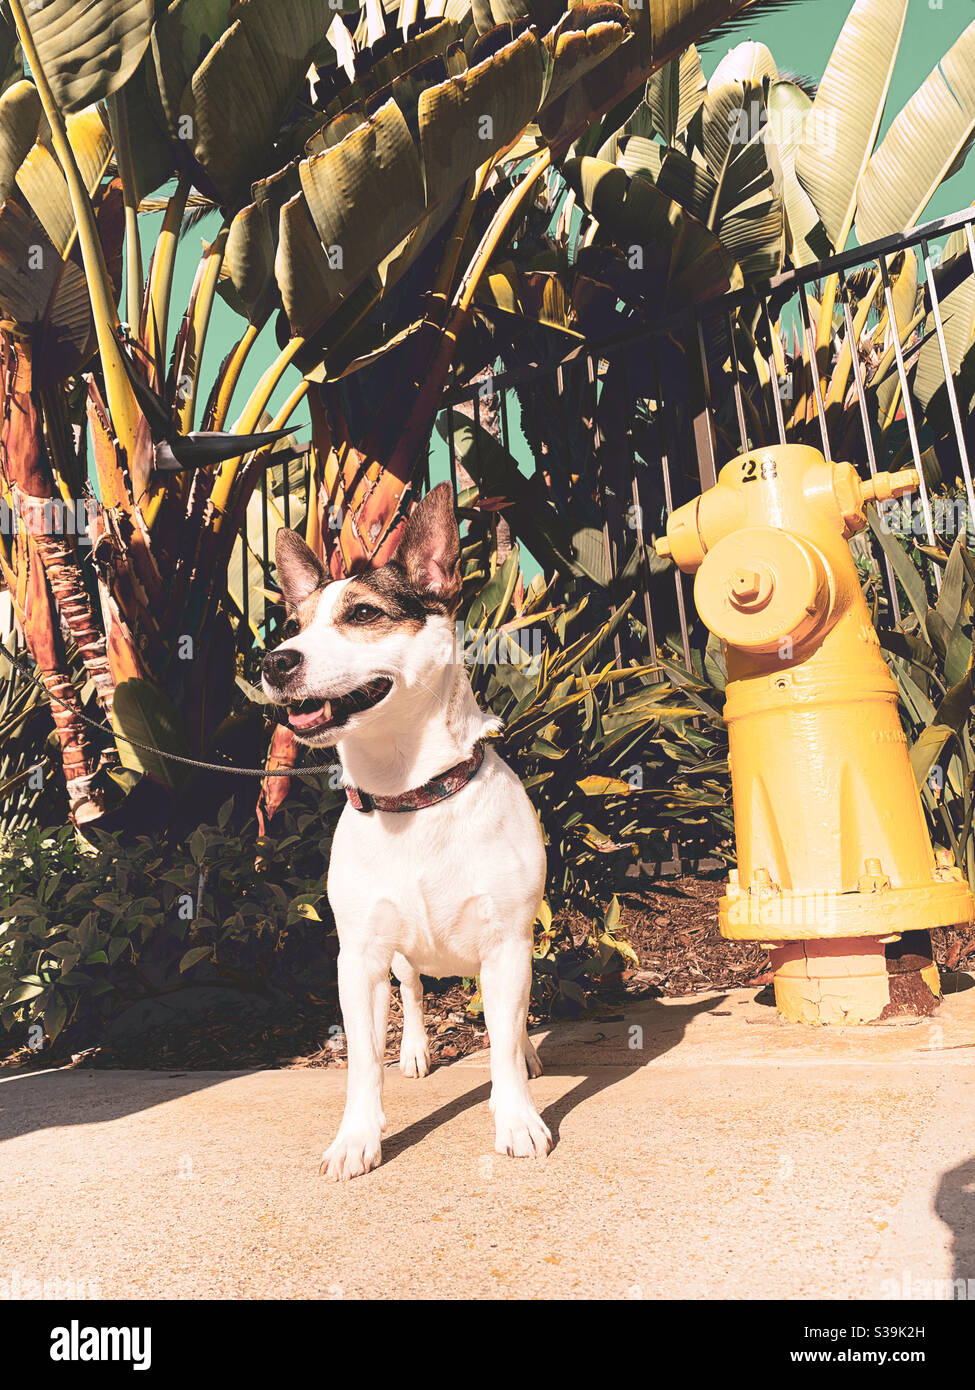 Low angle view of a Jack Russell Terrier dog in front of a yellow fire hydrant with tropical foliage in the background. Stock Photo